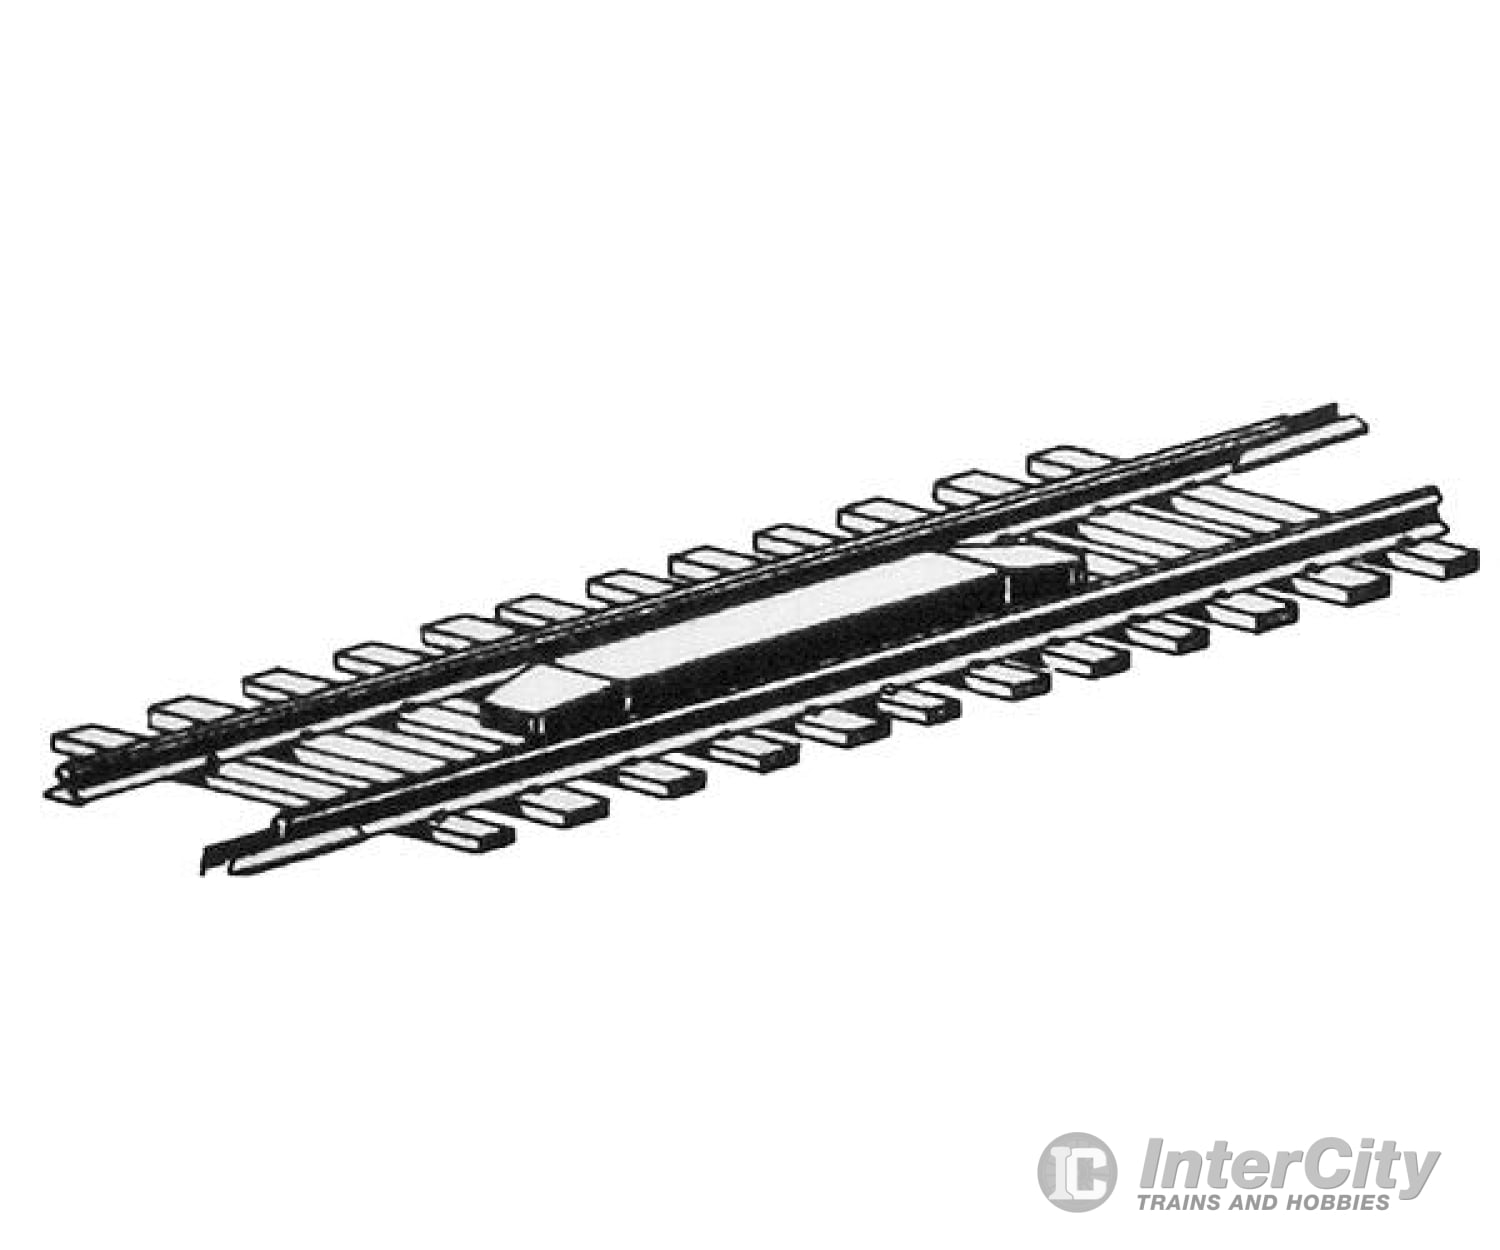 Micro Trains N 98800173 Permanent Uncoupler Magnet -- Mounted In Code 80 Track Section Accessories